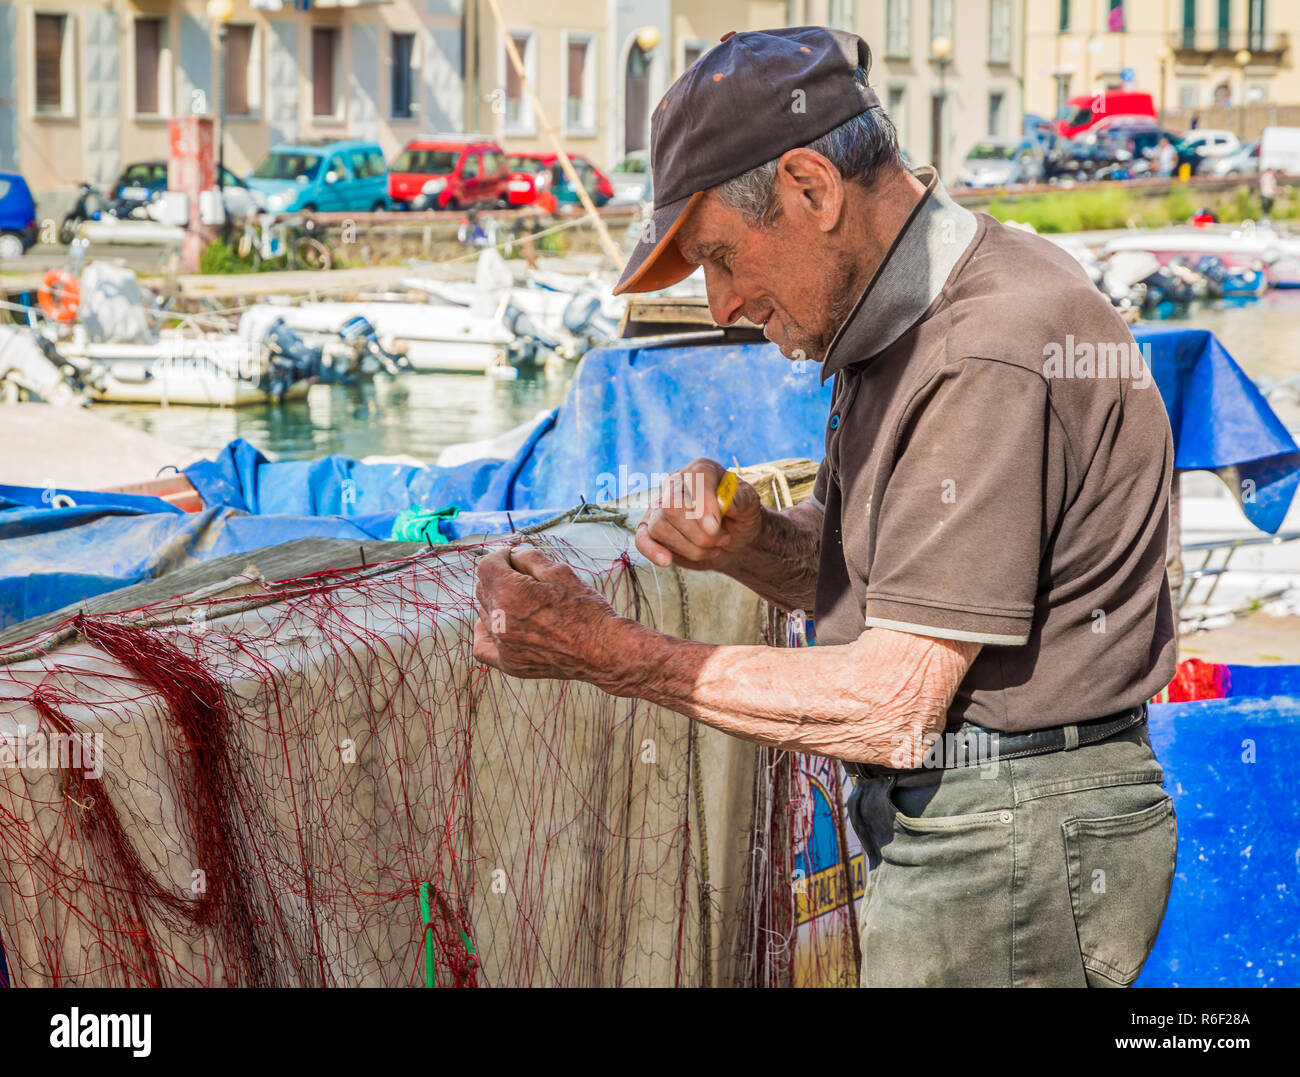 old fisherman repairing the net for fishing on an area that many call Piccola Venezia or little Venice, city of Livorno in Tuscany, Italy Stock Photo